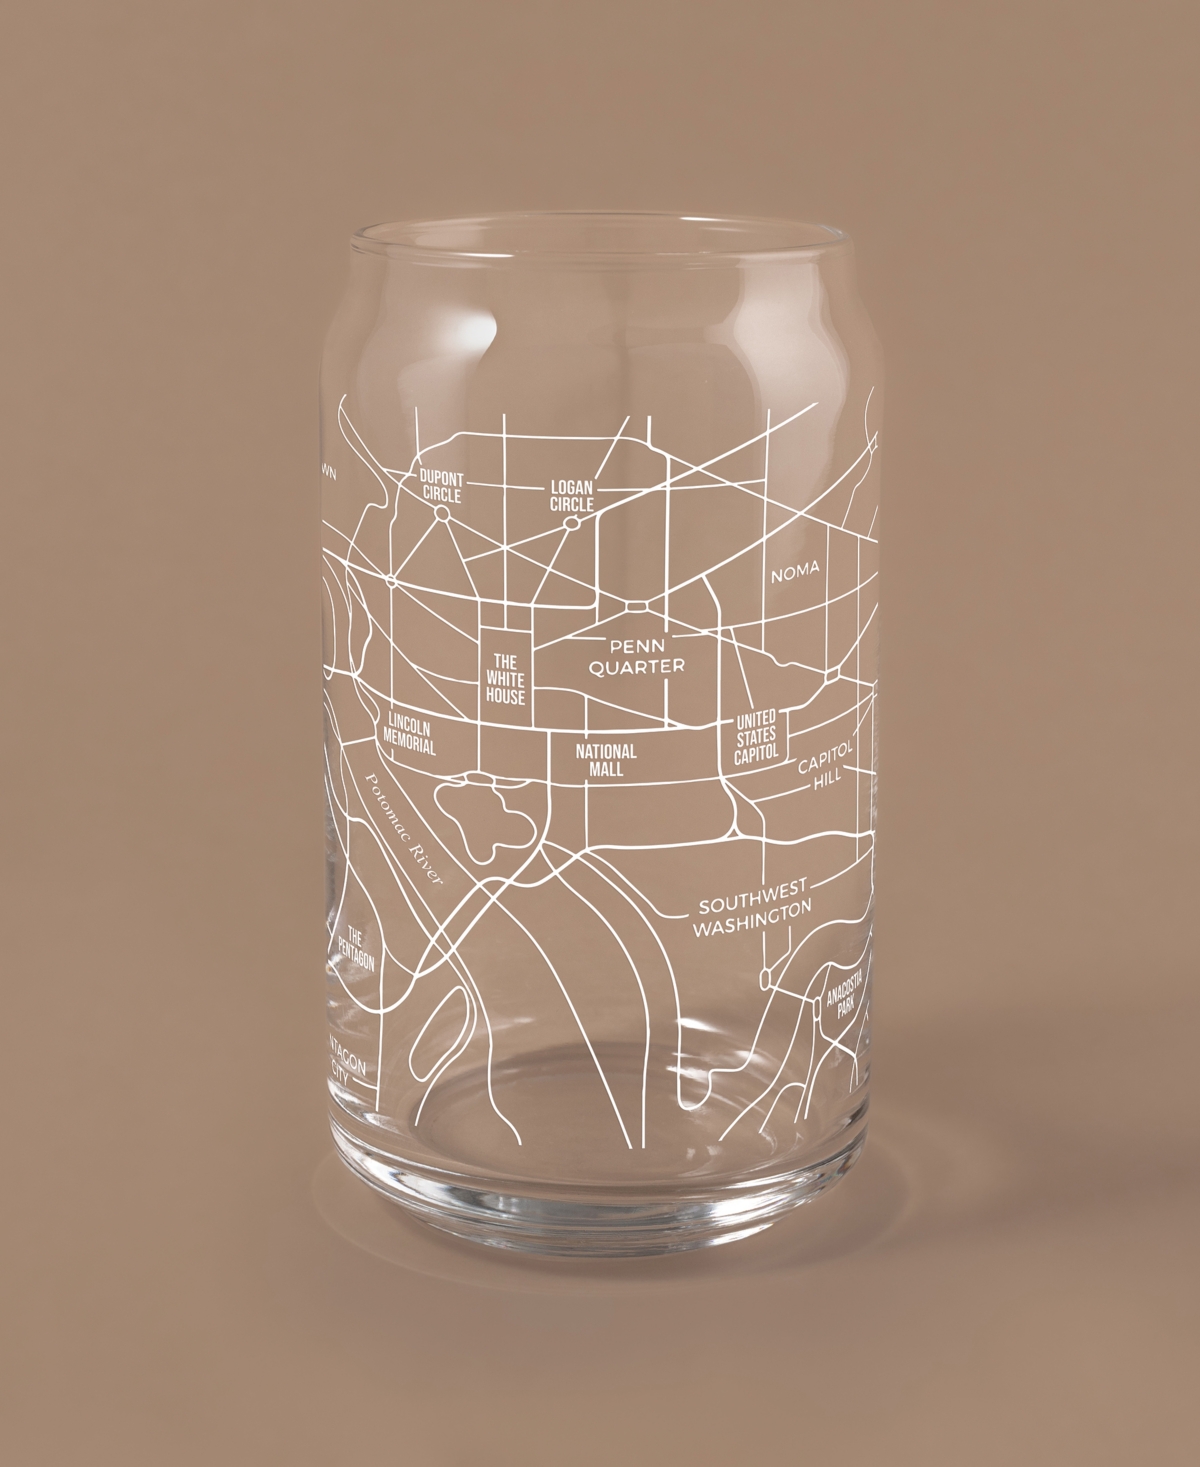 Shop Narbo The Can Washington Dc Map 16 oz Everyday Glassware, Set Of 2 In White